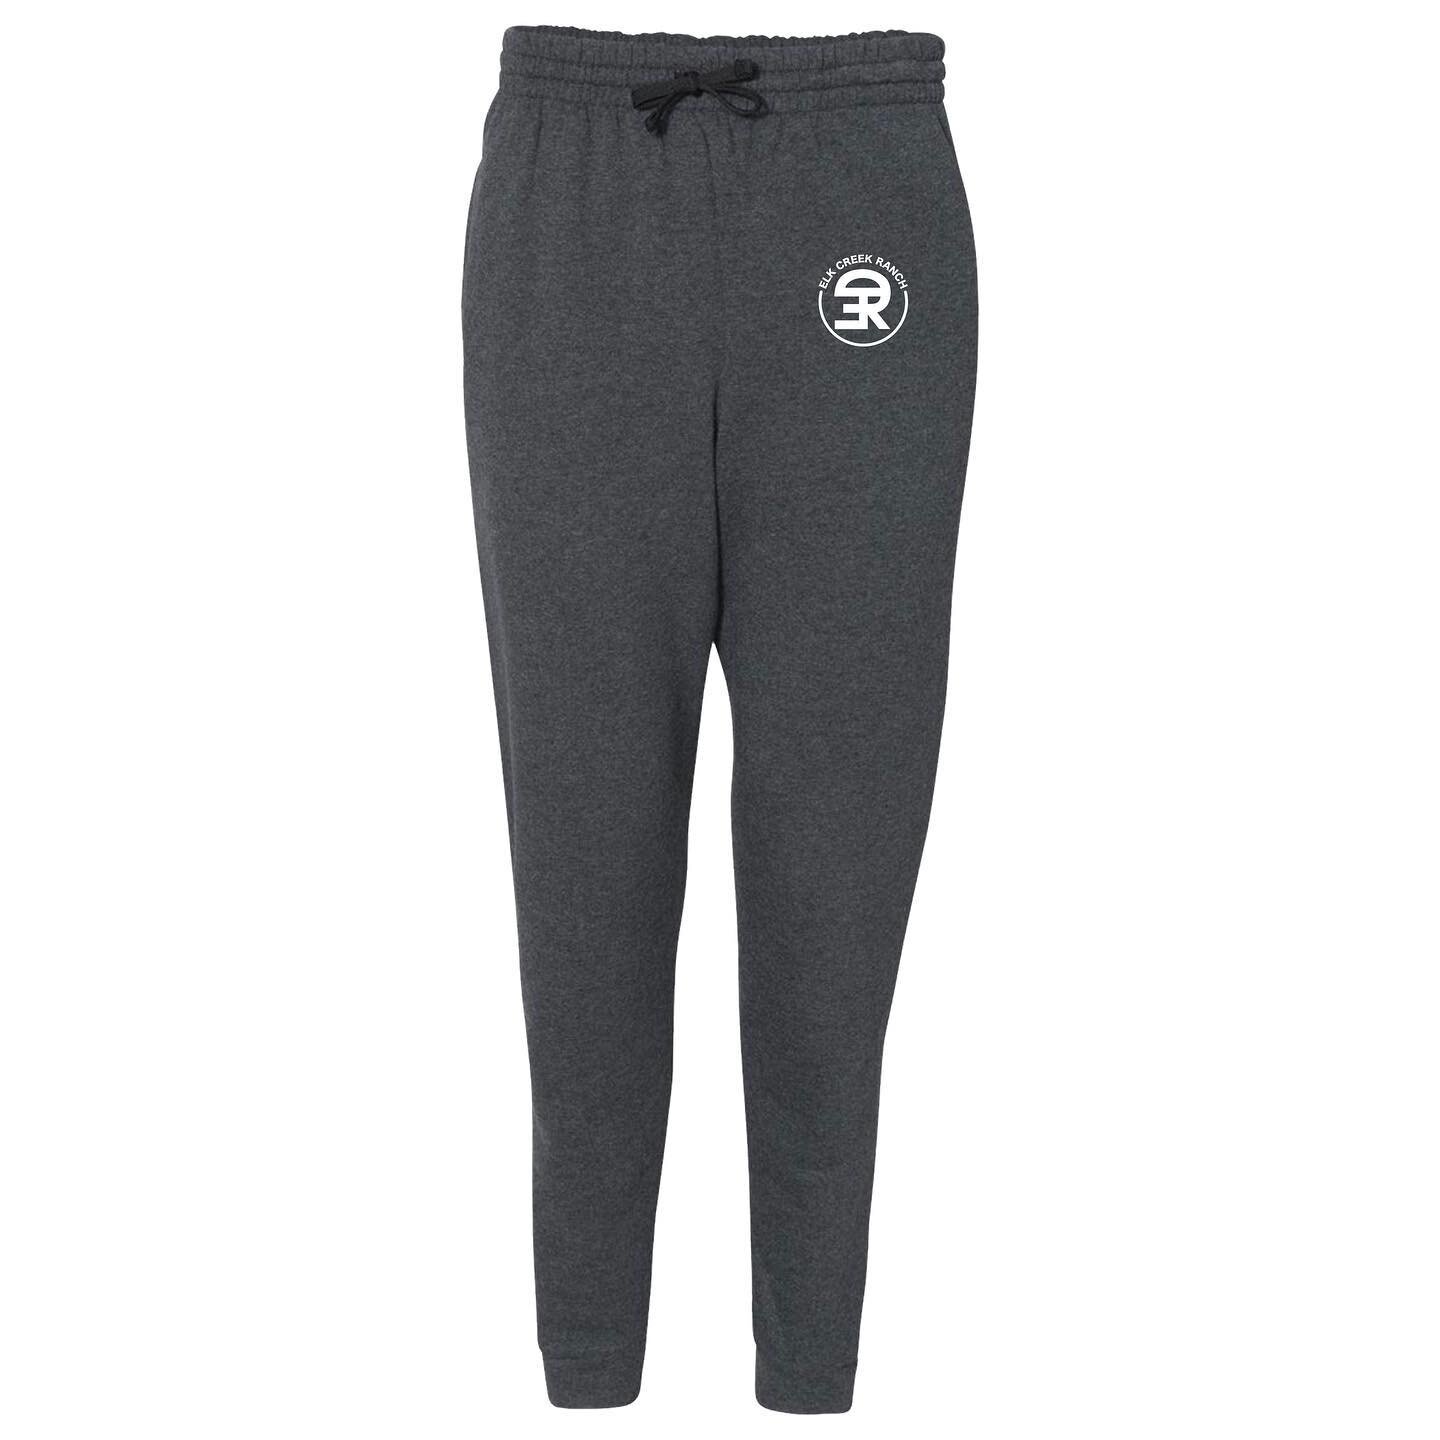 This wonderfully comfortable pair of sweatpants will do wonders. Who says you can&rsquo;t be jammie comfy all day long? www.elkcreekranchstore.com